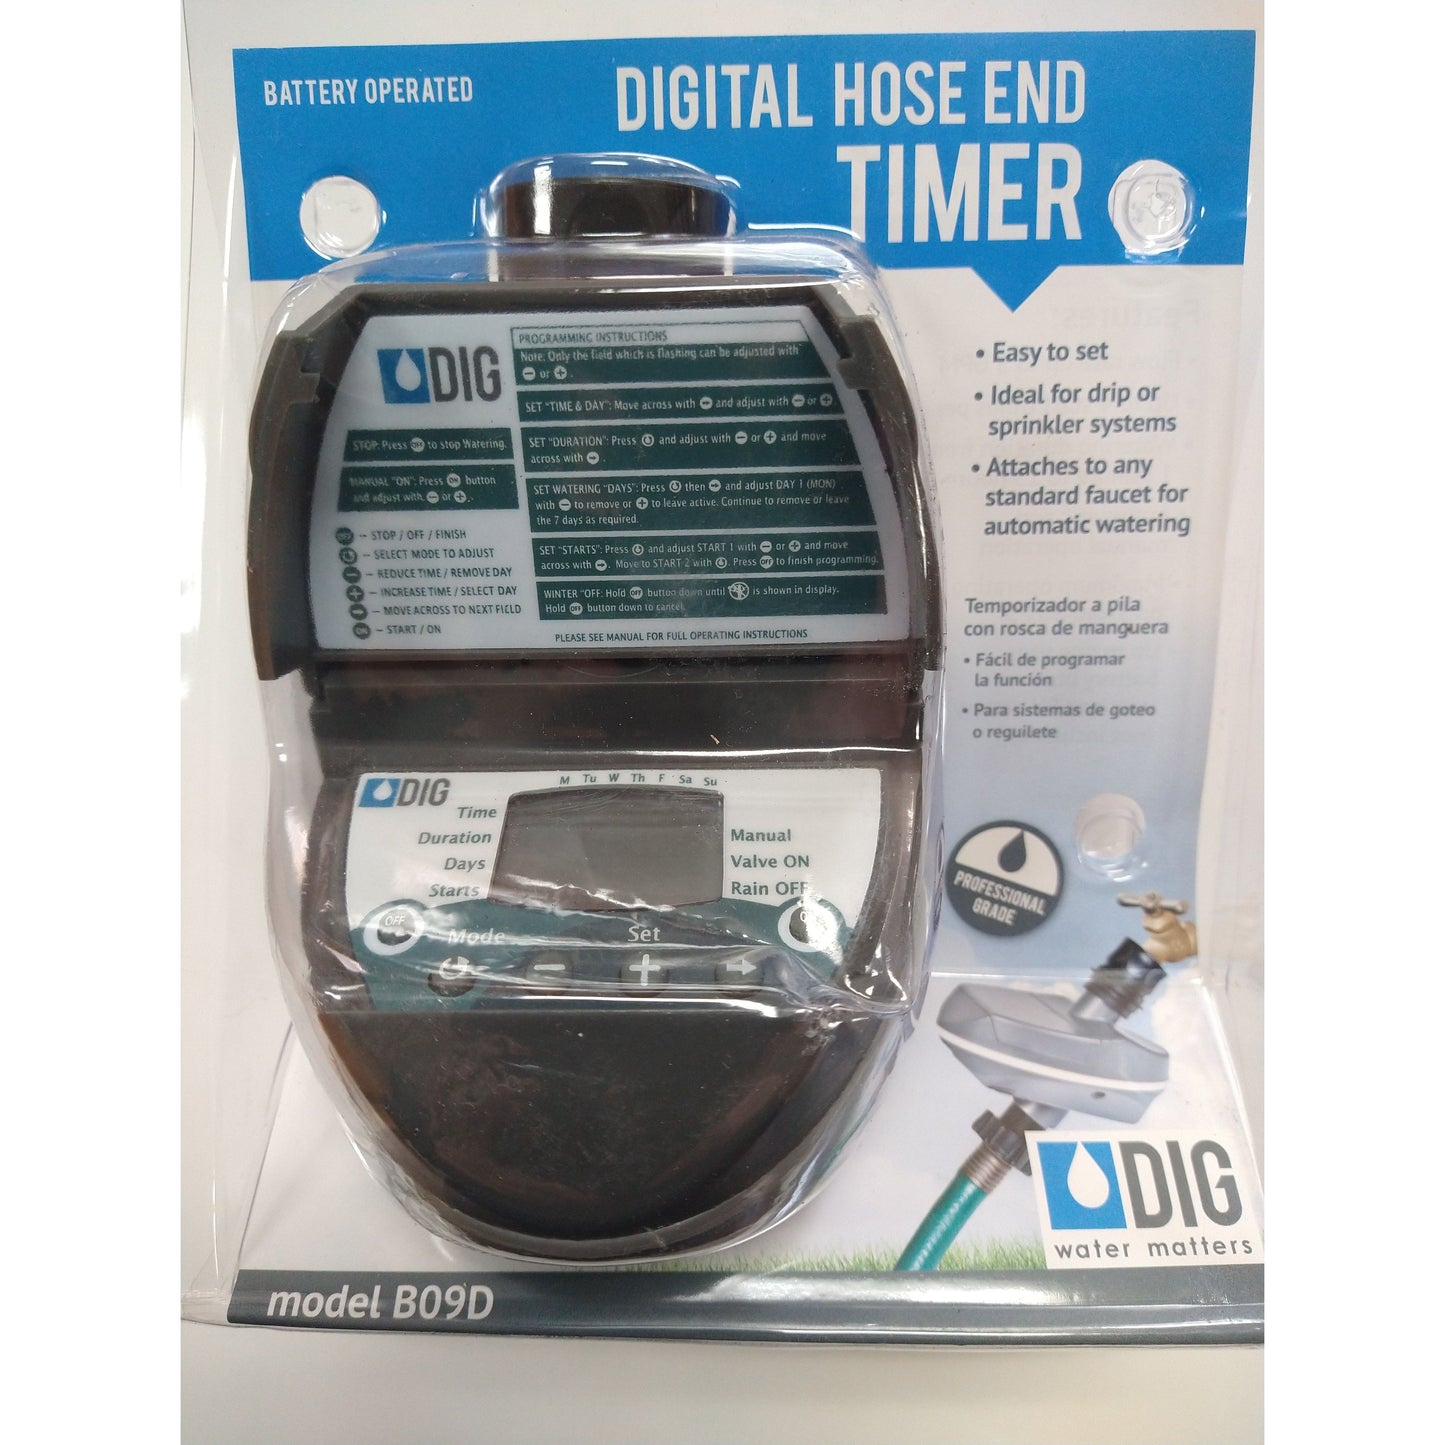 a digital hose end timer in a package